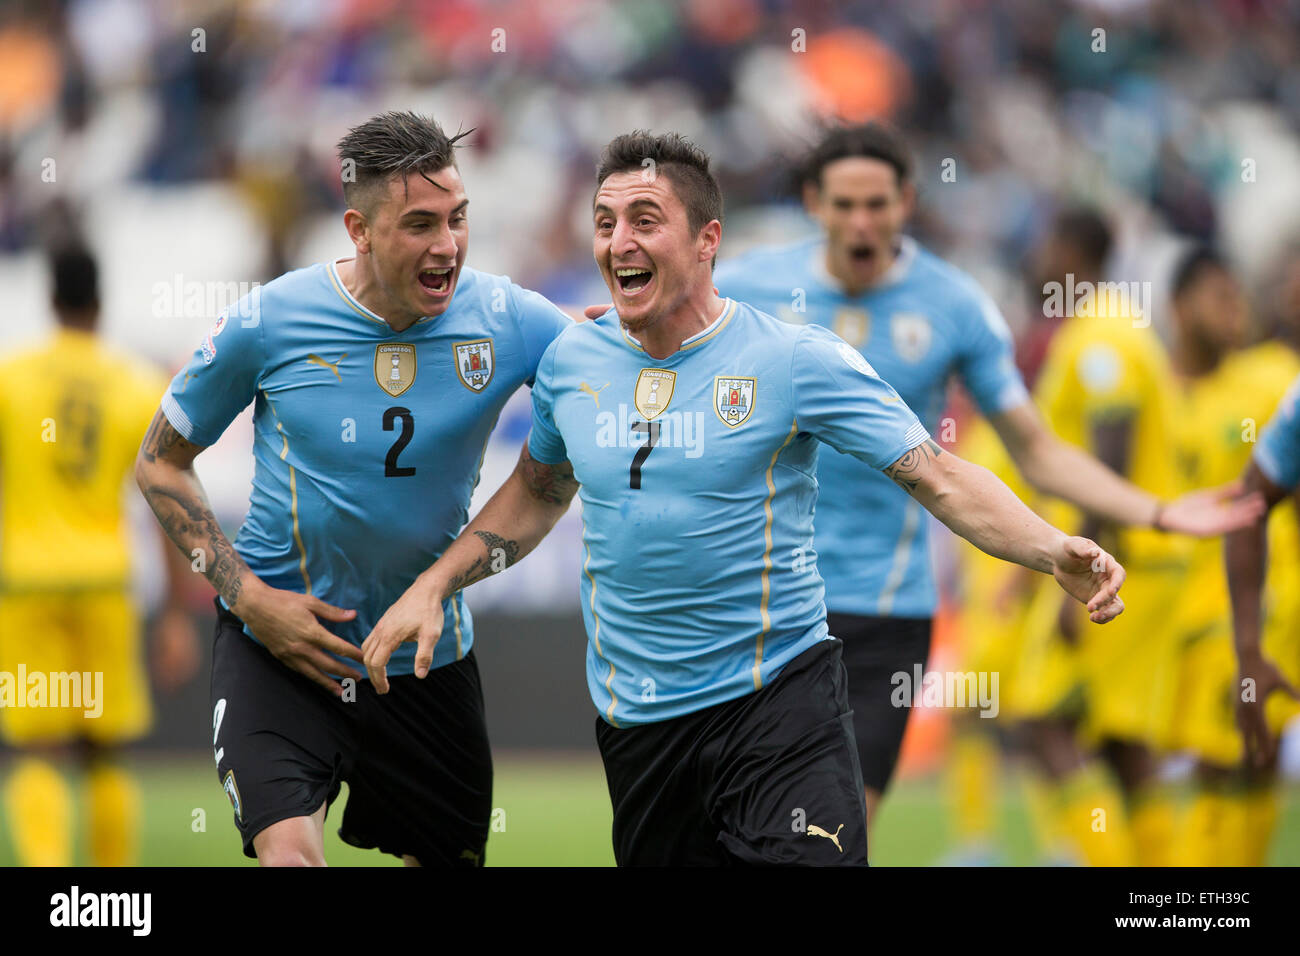 Antofagasta, Chile. 13th June, 2015. Cristian Rodriguez (R) of Uruguay celebrates after scoring during a Group B match between Uruguay and Jamaica at Copa America 2015, in Antofagasta, Chile, on June 13, 2015. Uruguay won 1-0. © Luis Echeverria/Xinhua/Alamy Live News Stock Photo